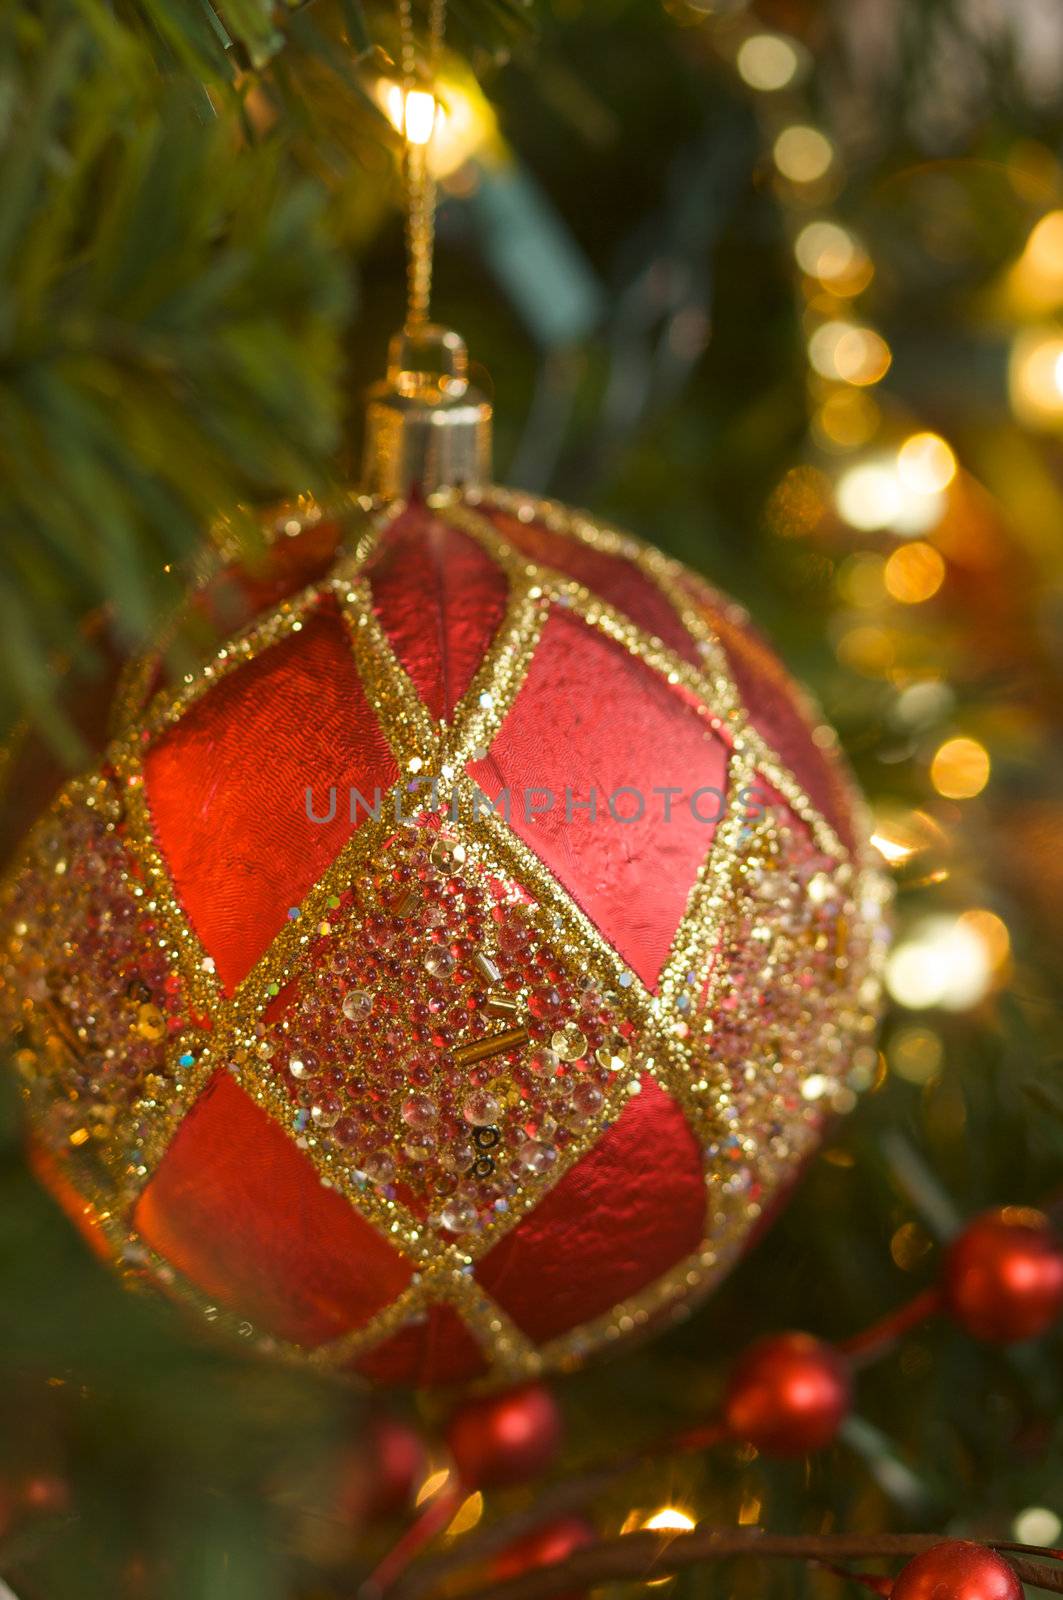 Ornate Ornament on the Tree by Feverpitched